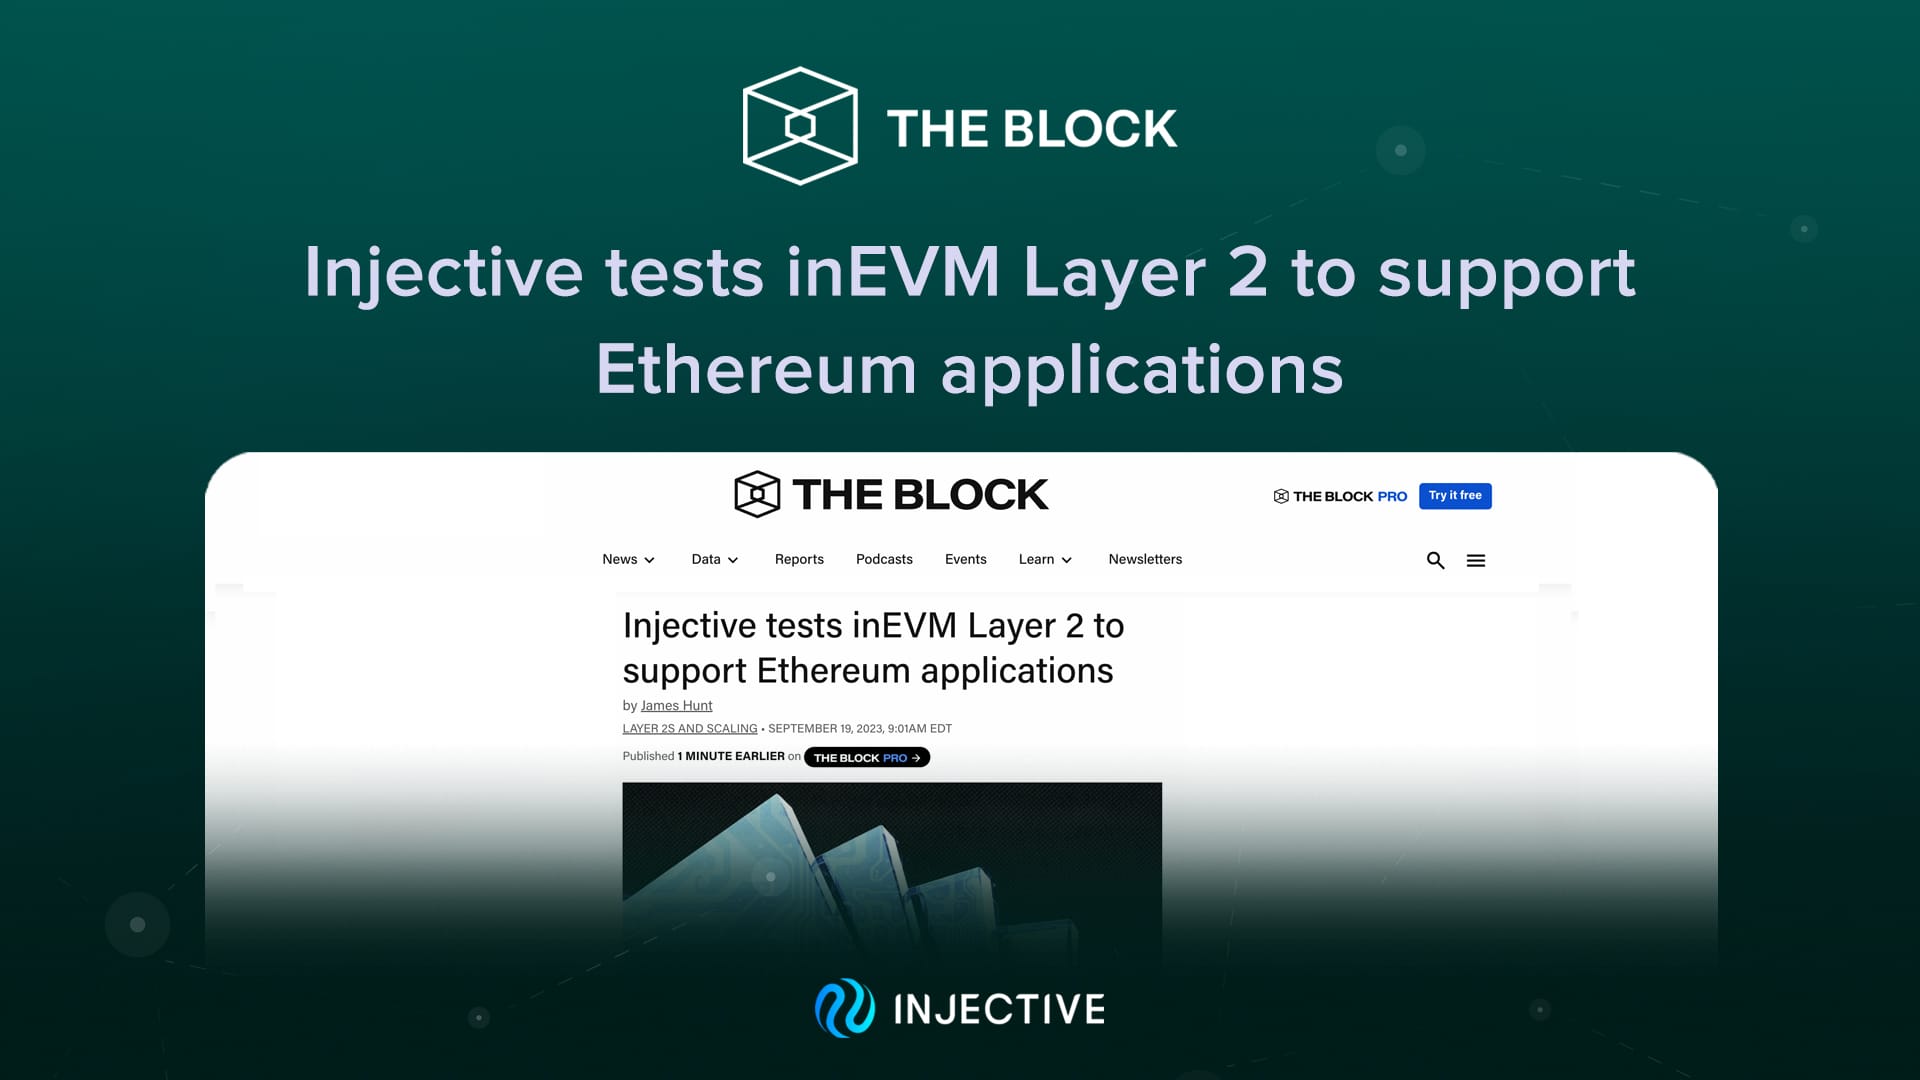 (The Block) Injective tests inEVM Layer 2 to support Ethereum applications